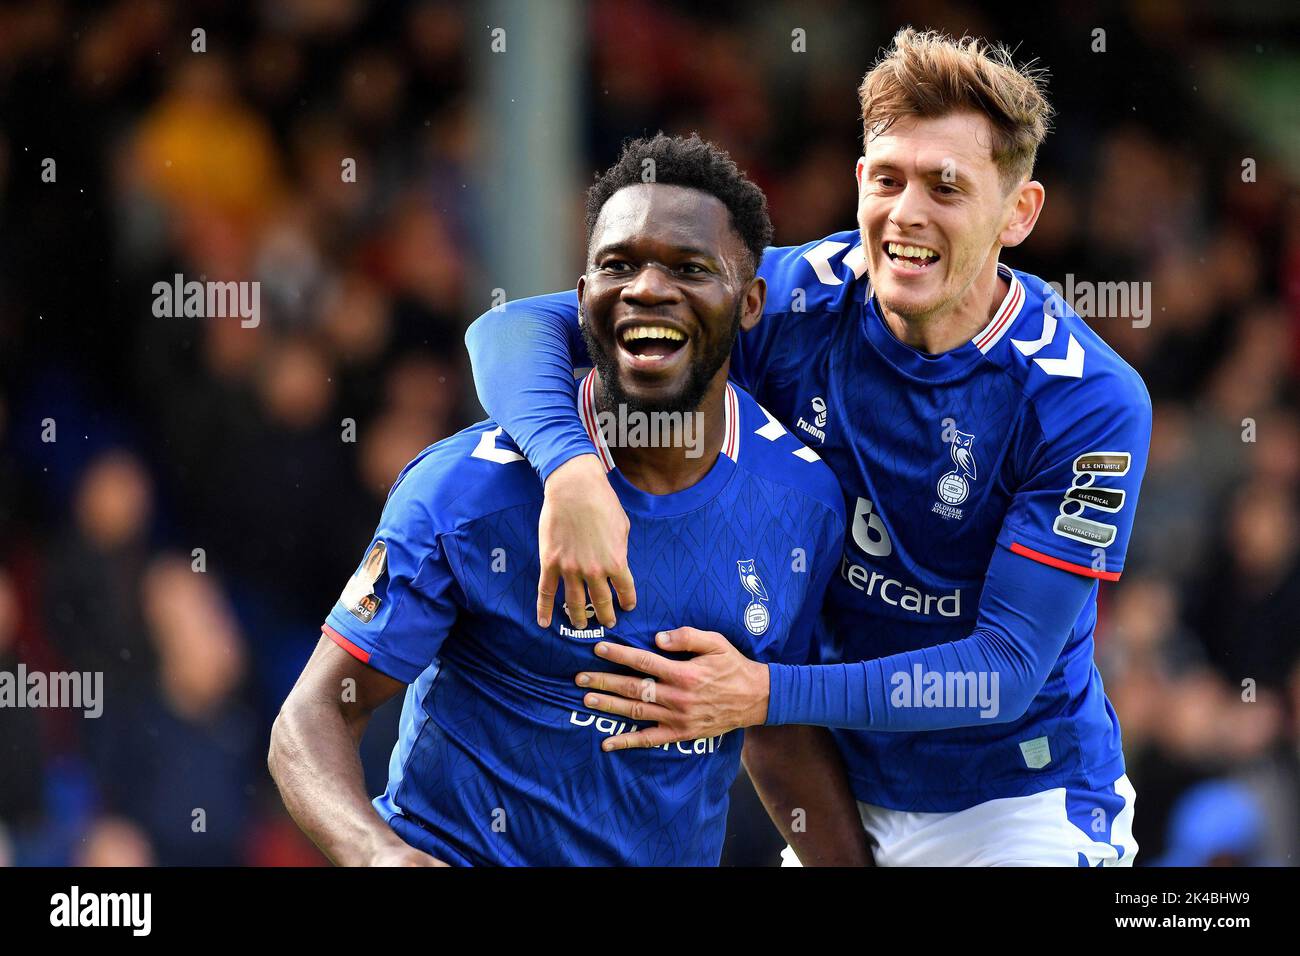 Oldham, UK. 1st October 2022during the Vanarama National League match between Oldham Athletic and Wrexham at Boundary Park, Oldham on Saturday 1st October 2022Mike Fondop-Talom of Oldham Athletic celebrates scoring his side's first goal of the game with Ben Tollitt of Oldham Athletic during the Vanarama National League match between Oldham Athletic and Wrexham at Boundary Park, Oldham on Saturday 1st October 2022. Credit: MI News & Sport /Alamy Live News Stock Photo